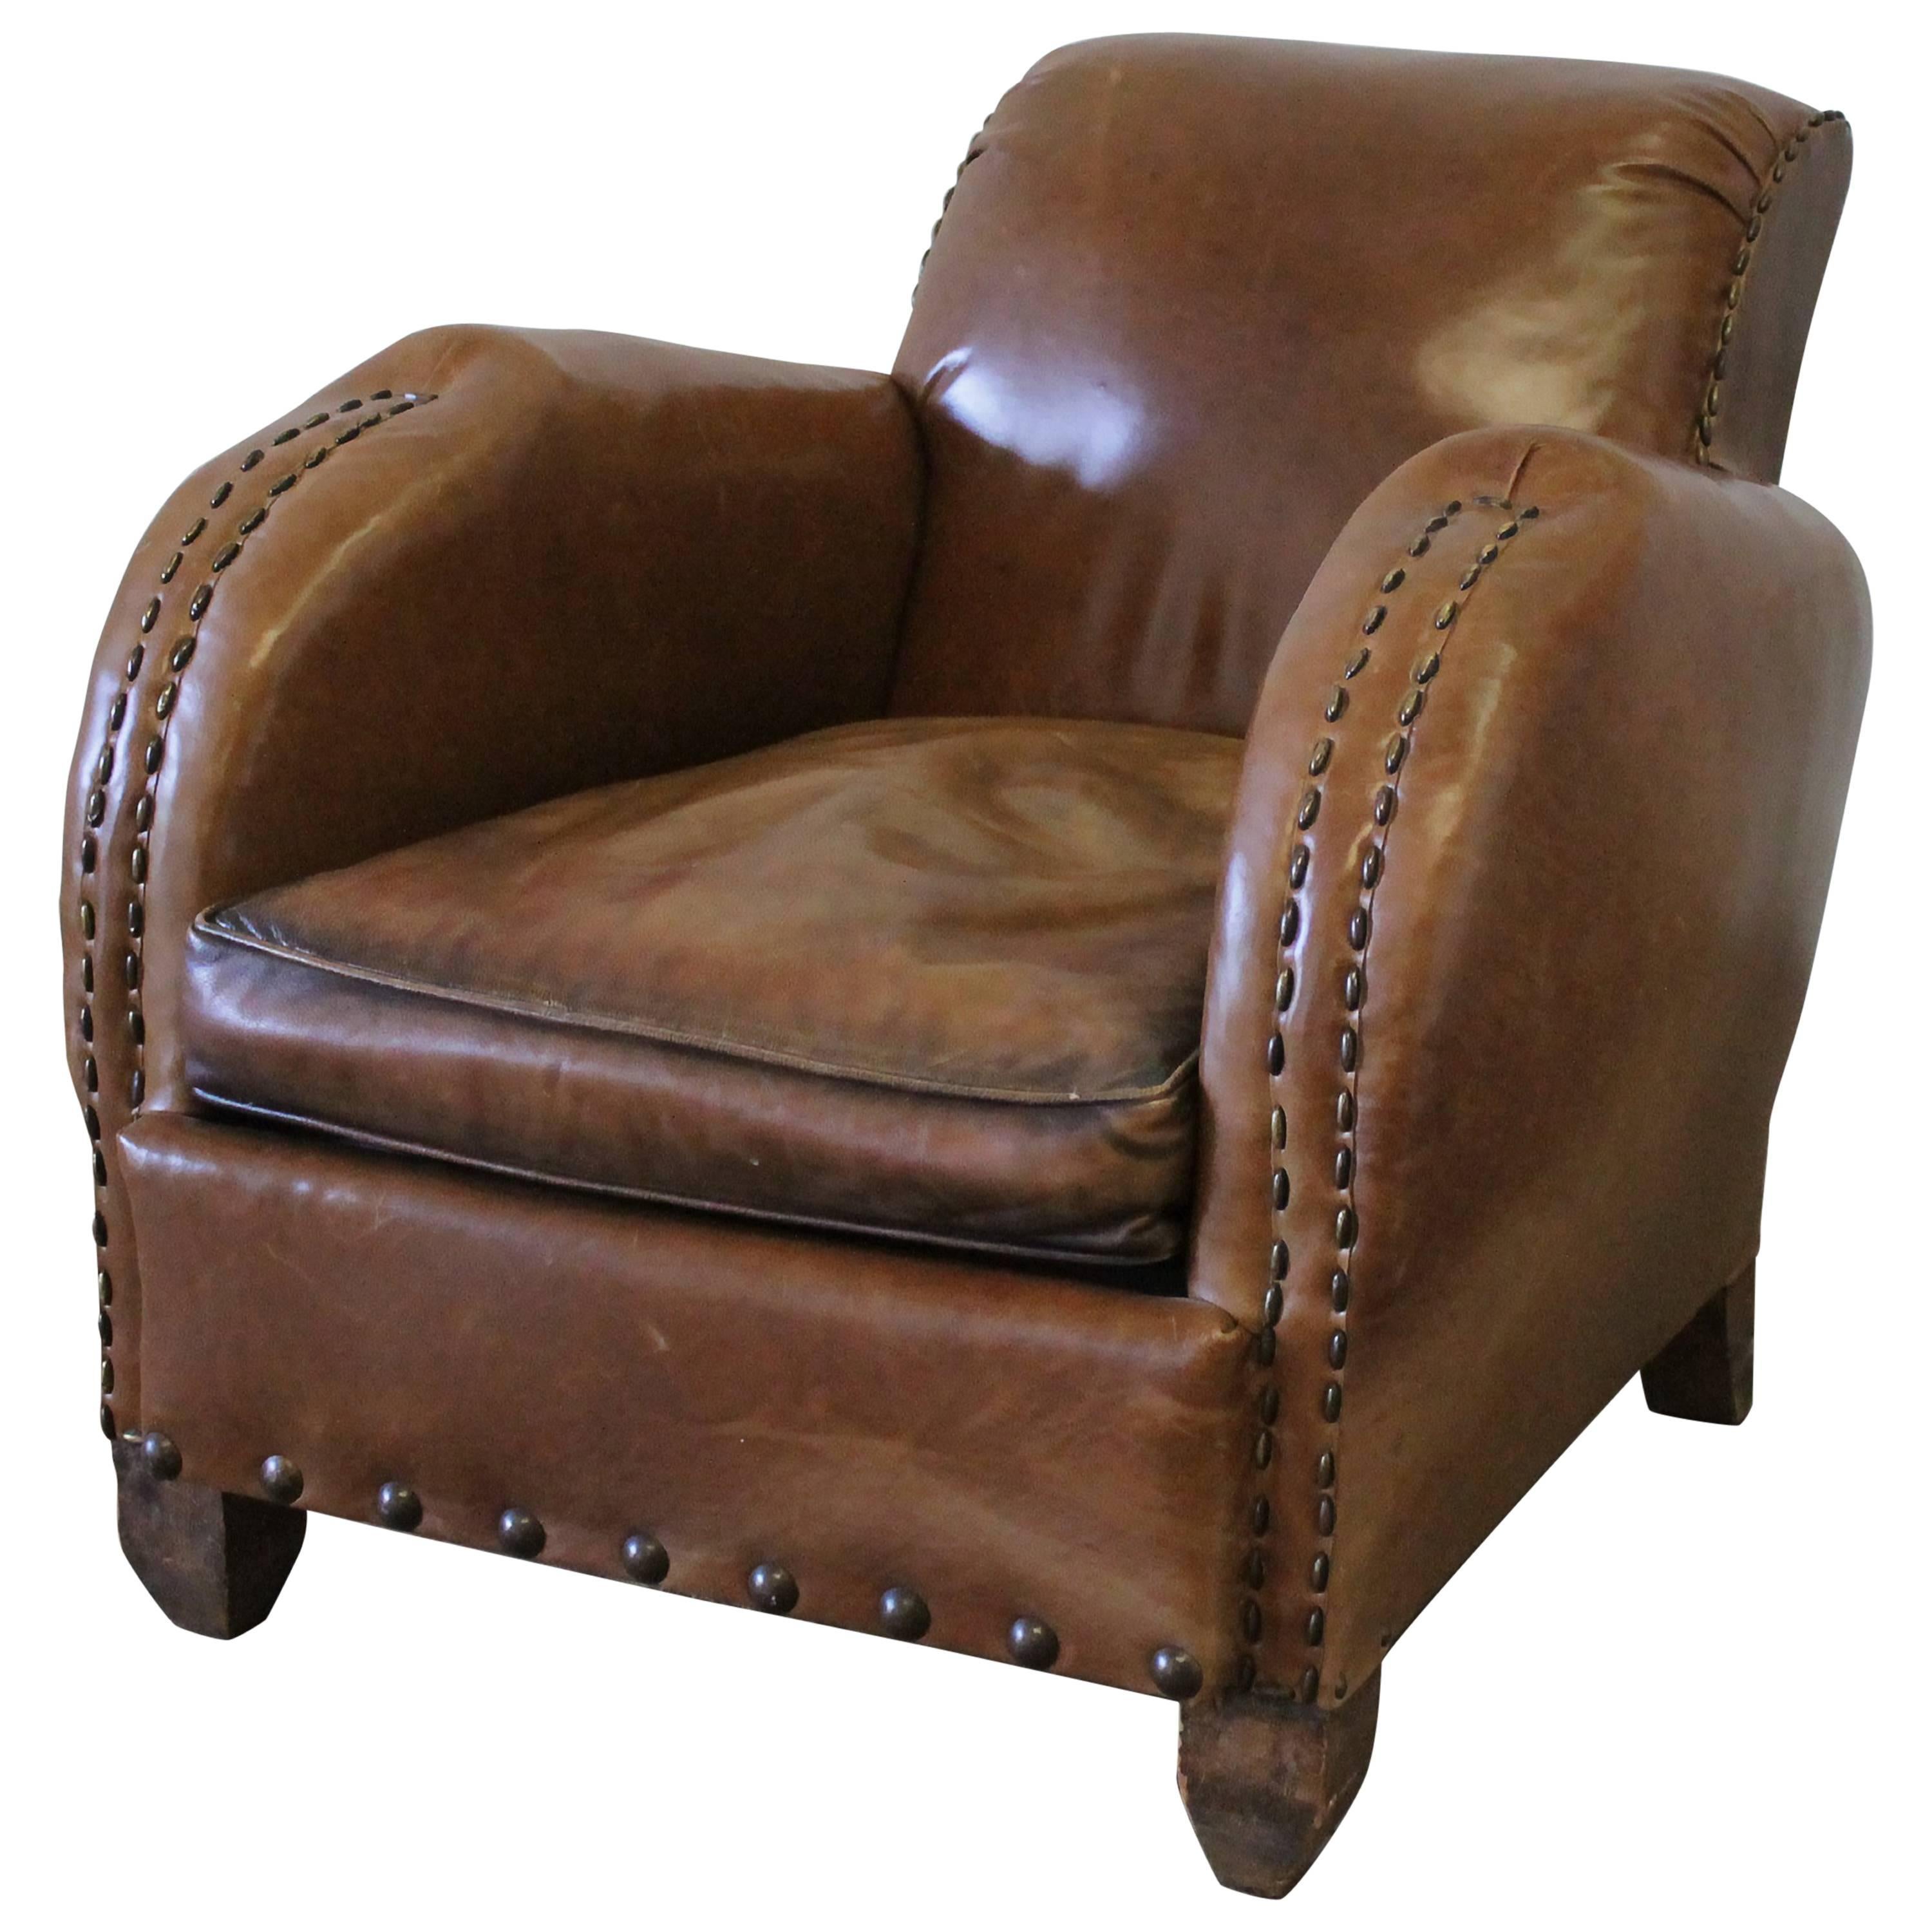 Early 20th Century Art Deco Style French Leather Club Chair